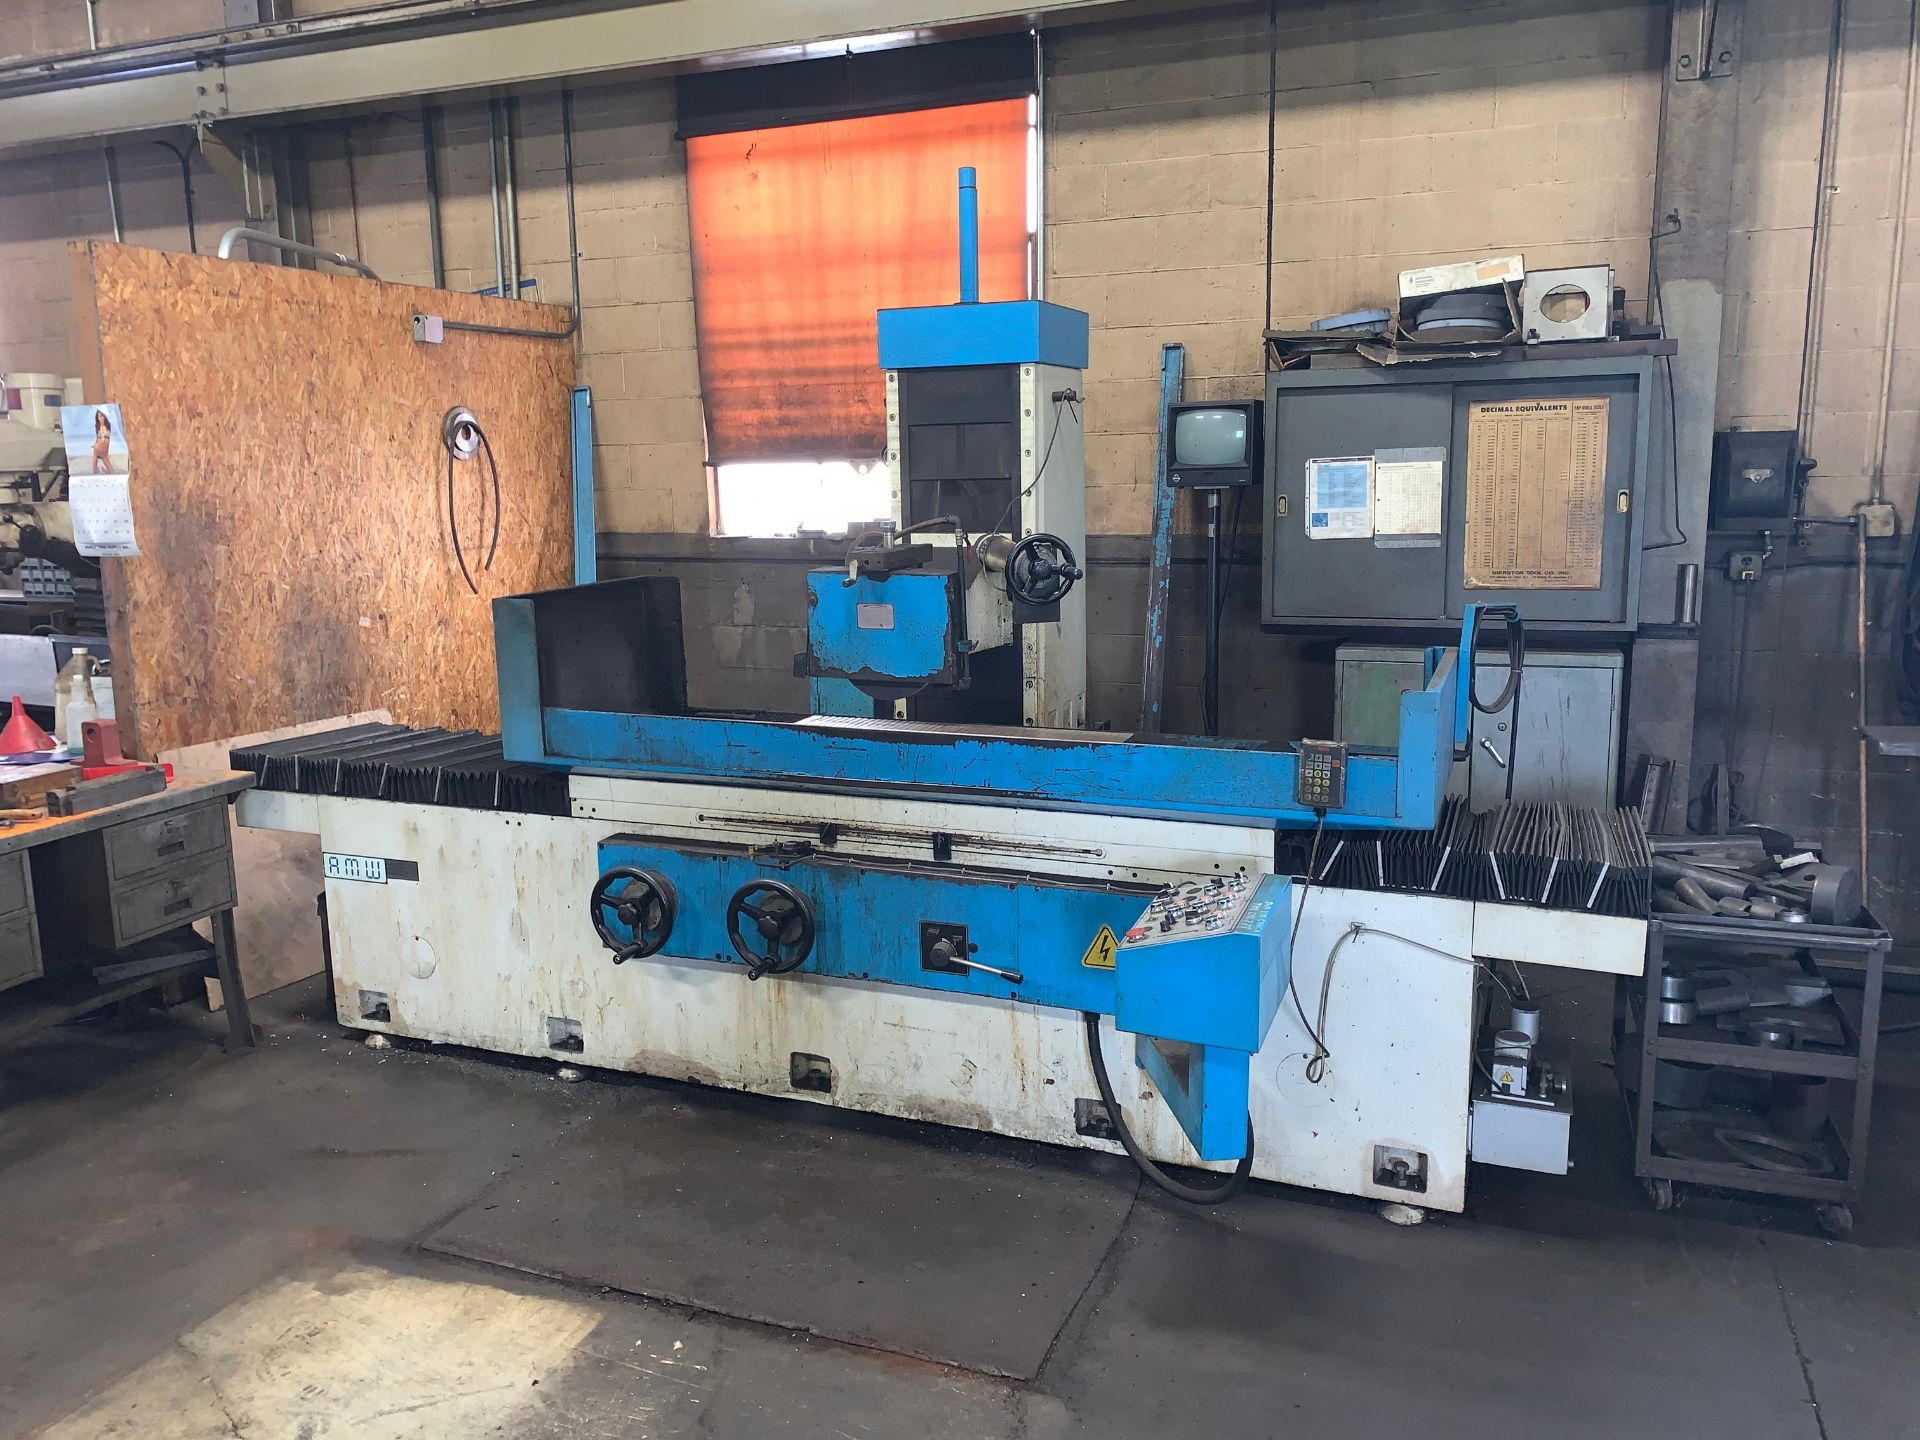 AMW Mdl. GS-G5010AHR Hydraulic Surface Grinder with 20" x 40" Electromagnetic Chuck, 46"